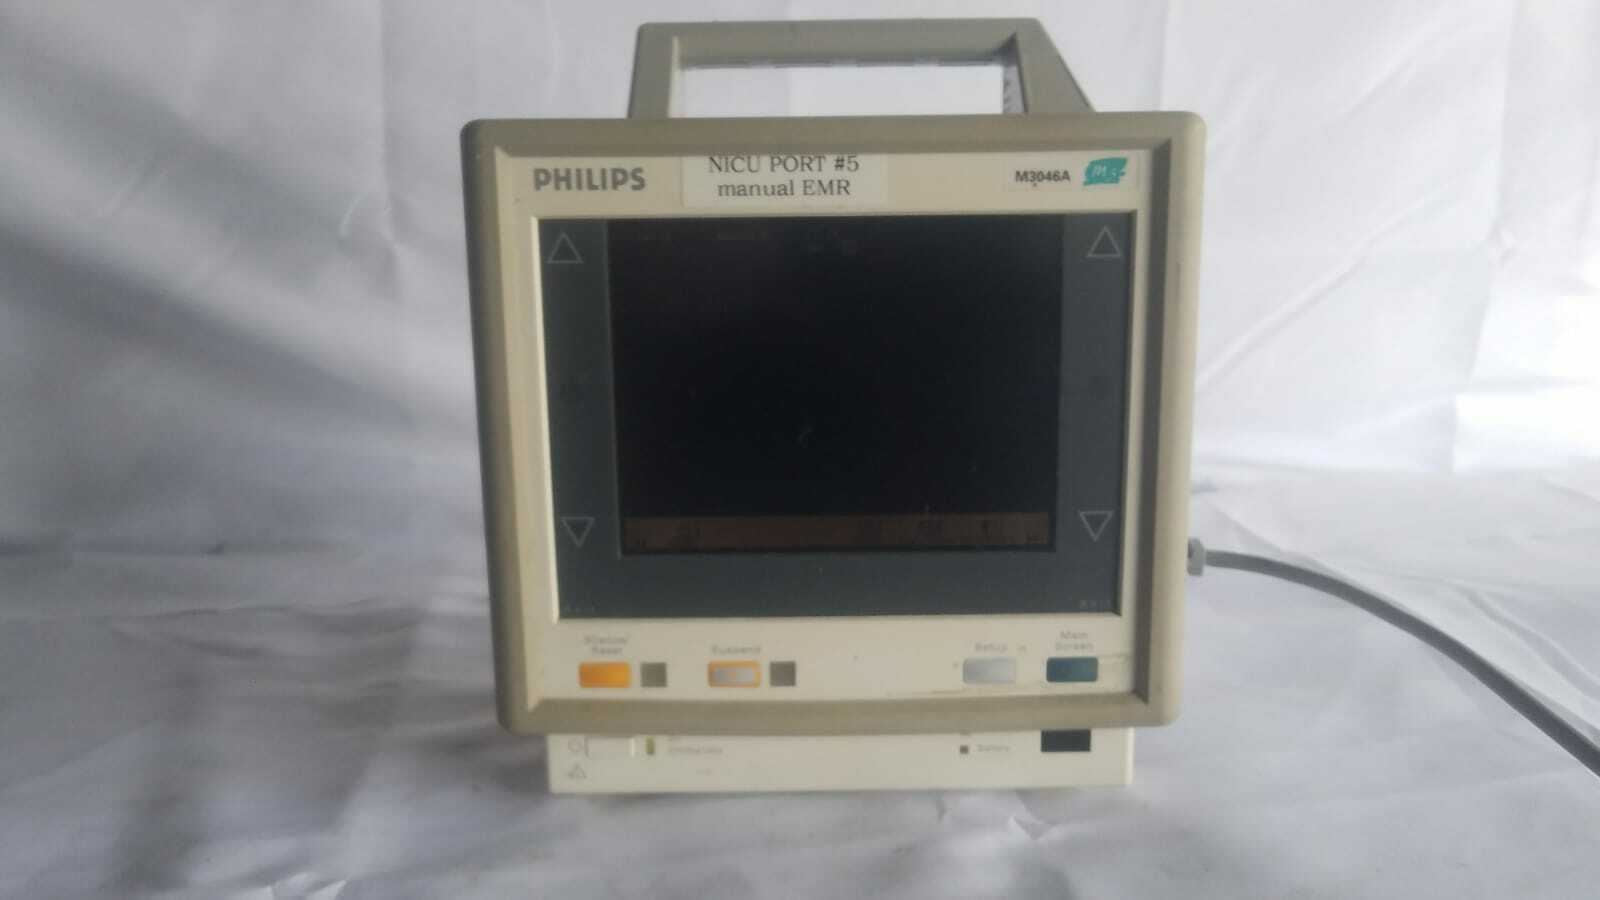 Philips M3 M3046A Portable Color Patient Monitor (NY213U) DIAGNOSTIC ULTRASOUND MACHINES FOR SALE